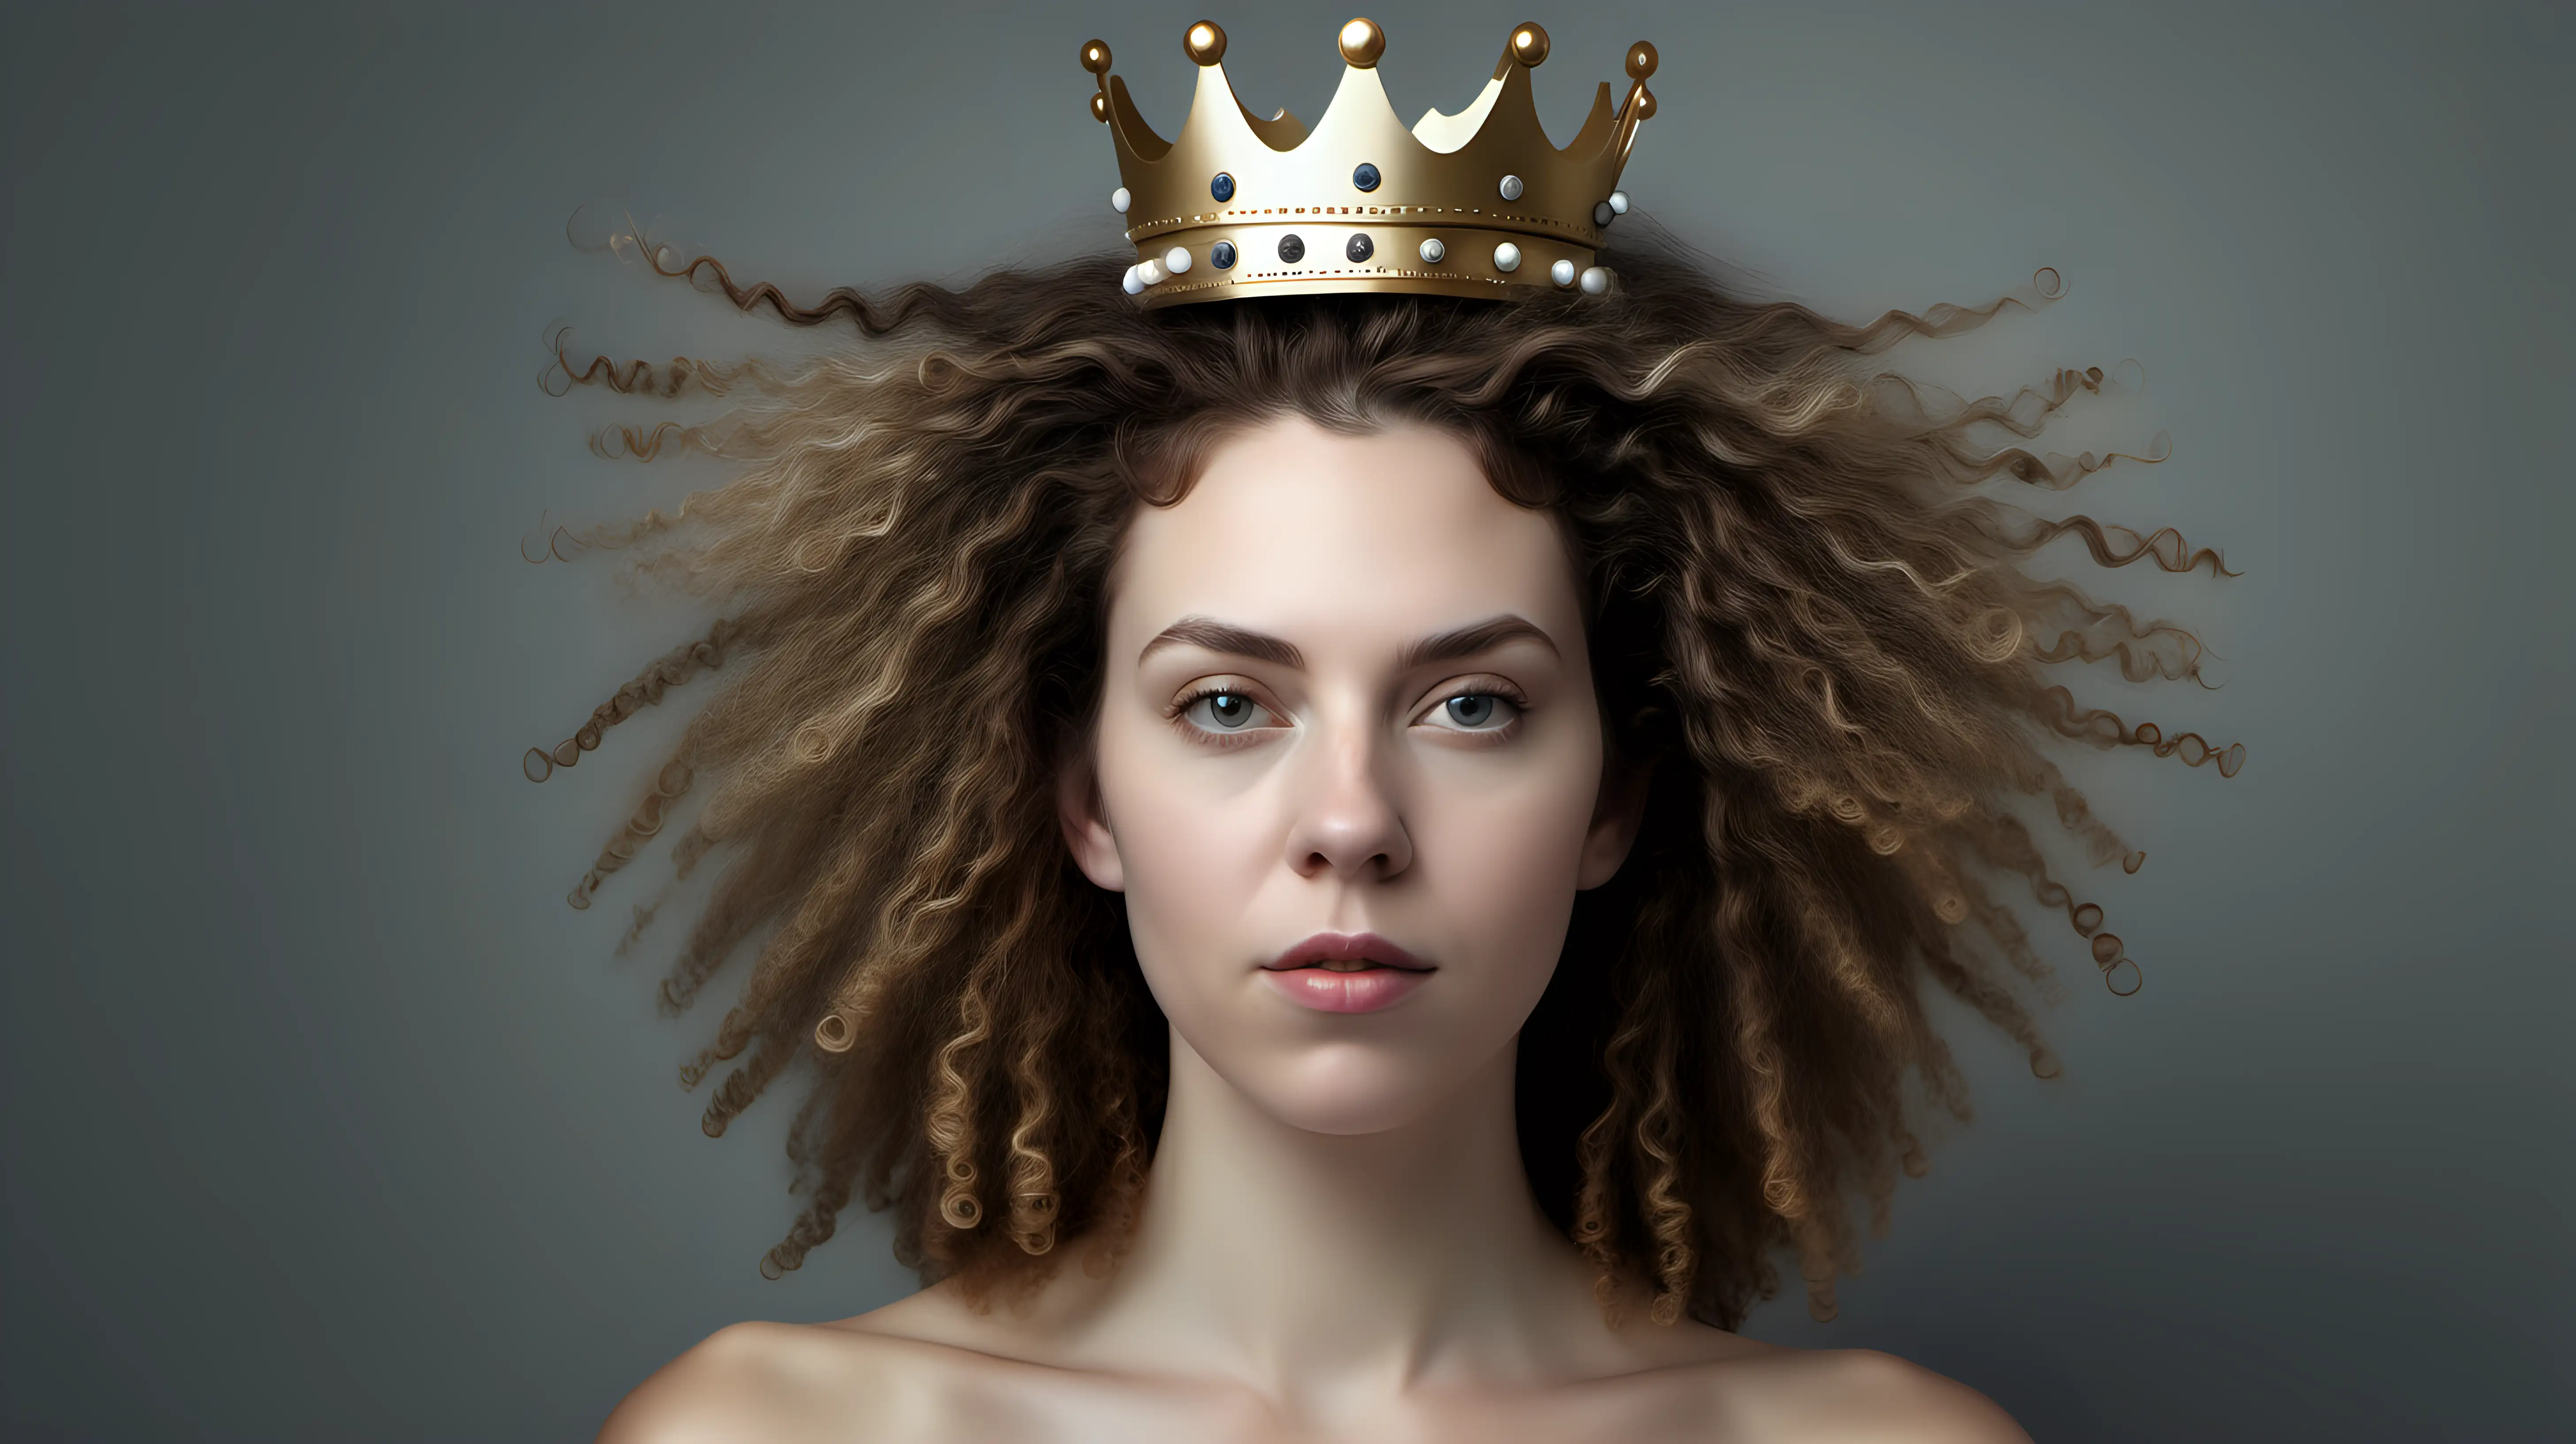 Elegant White Woman Portrait with Crown and Natural Hair